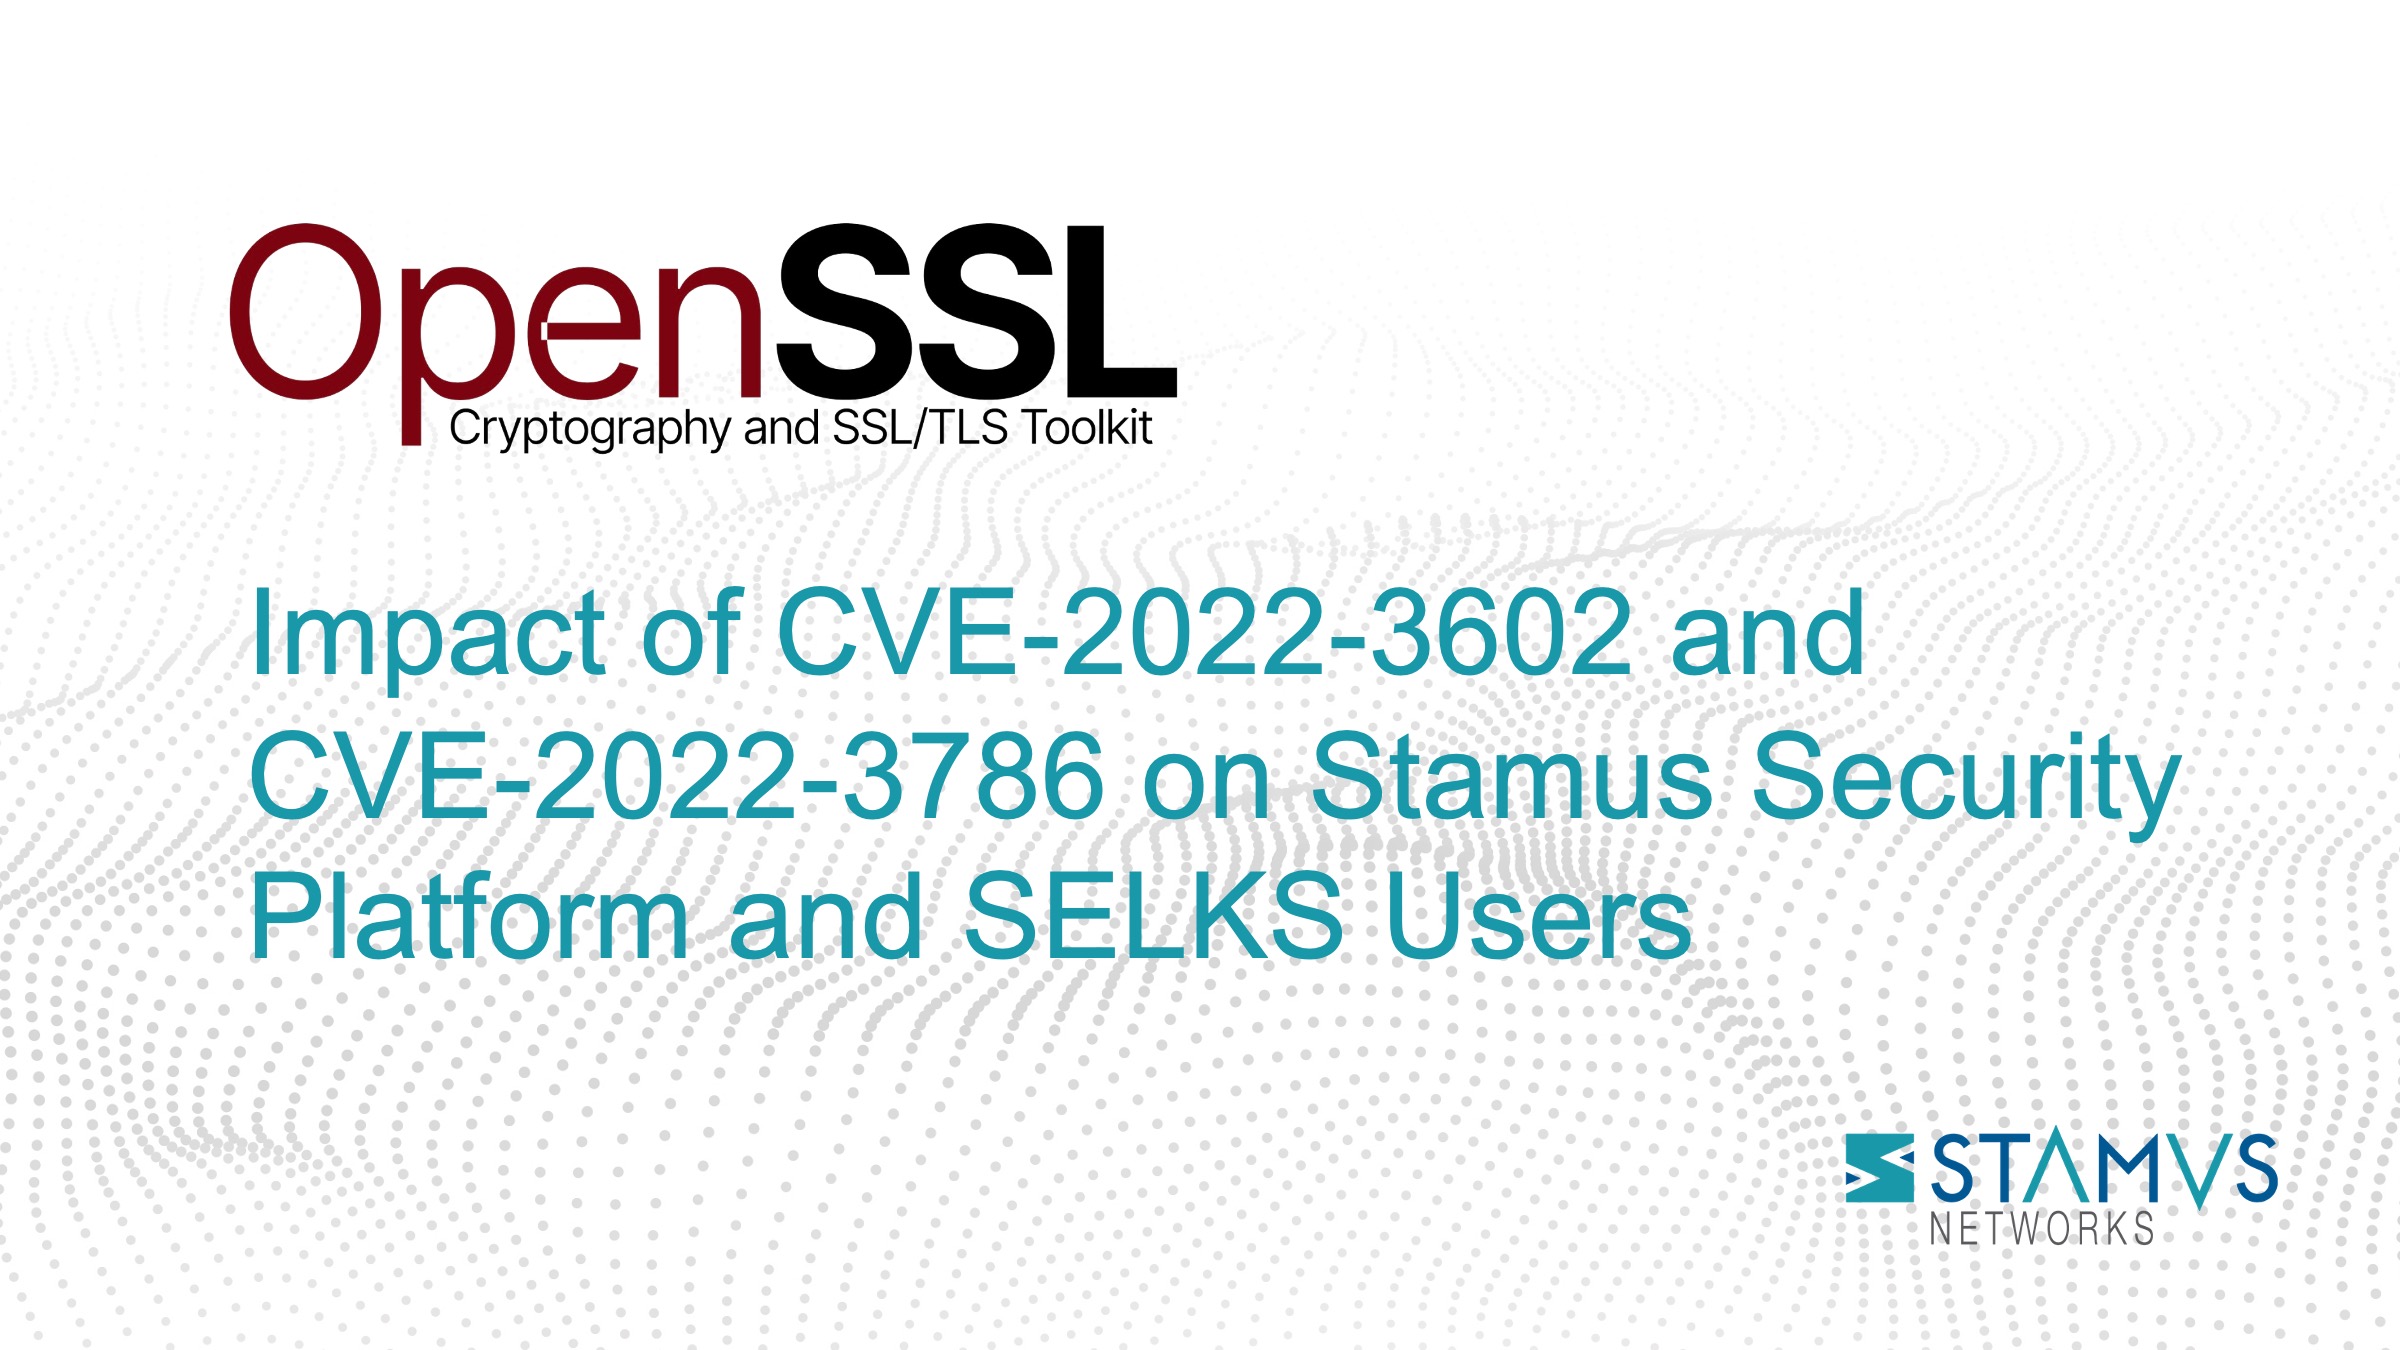 IMAGE: Impact of OpenSSL CVE-2022-3602 and CVE-2022-3786 on SSP and SELKS Users